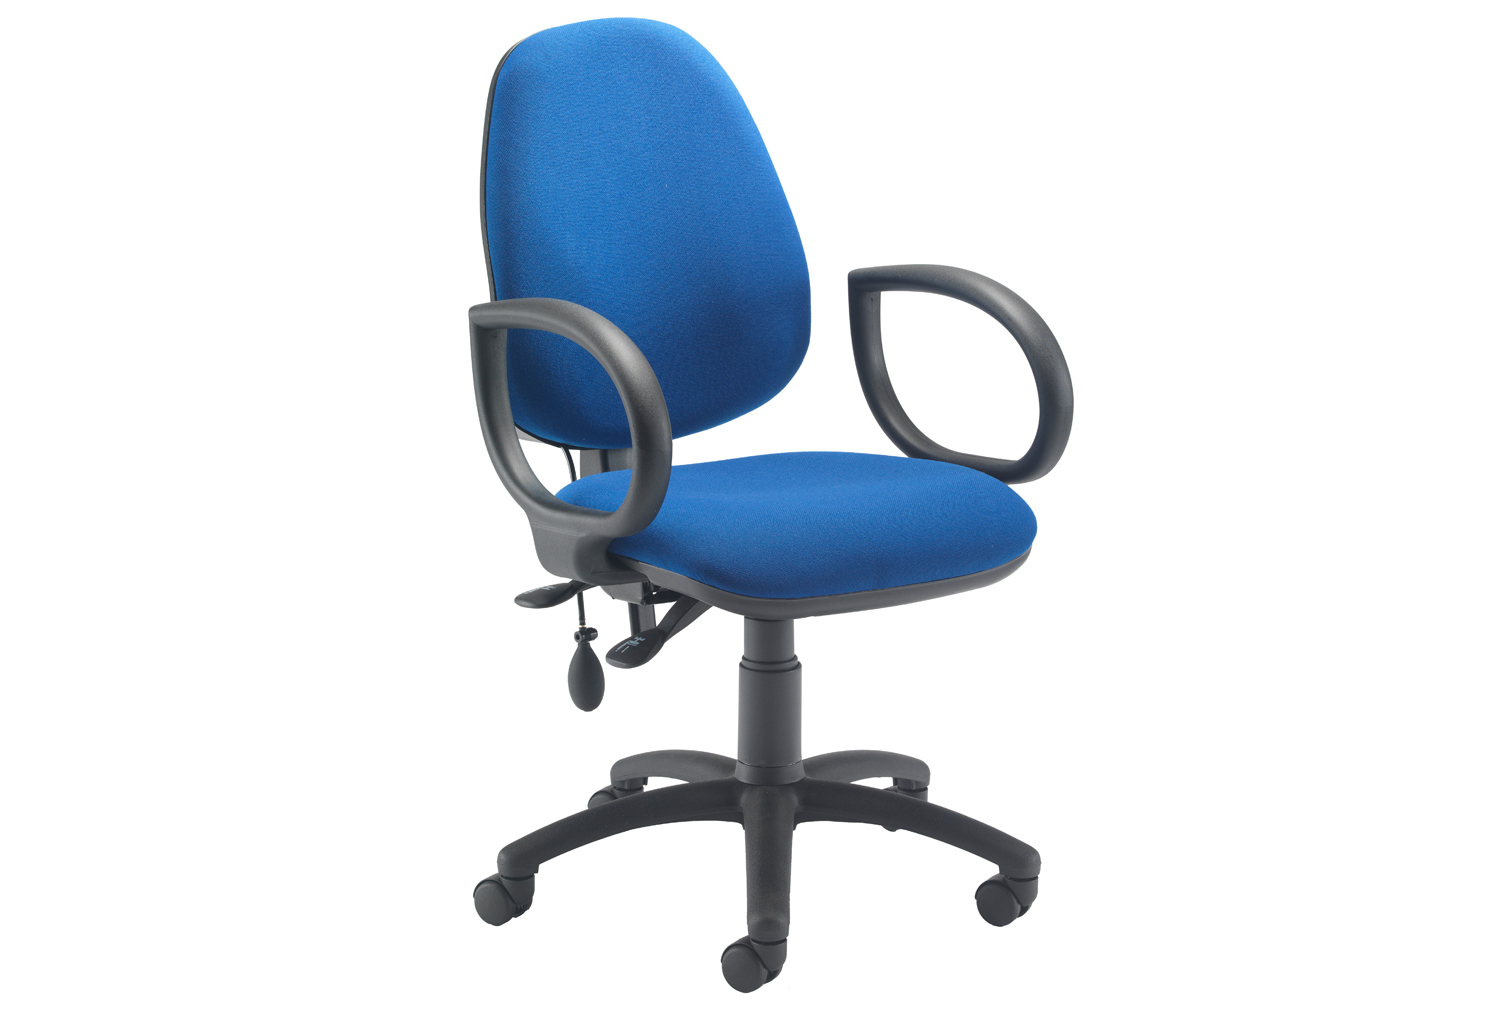 Orchid Lumbar Pump Ergonomic Operator Office Chair With Fixed Arms, Burgundy, Fully Installed